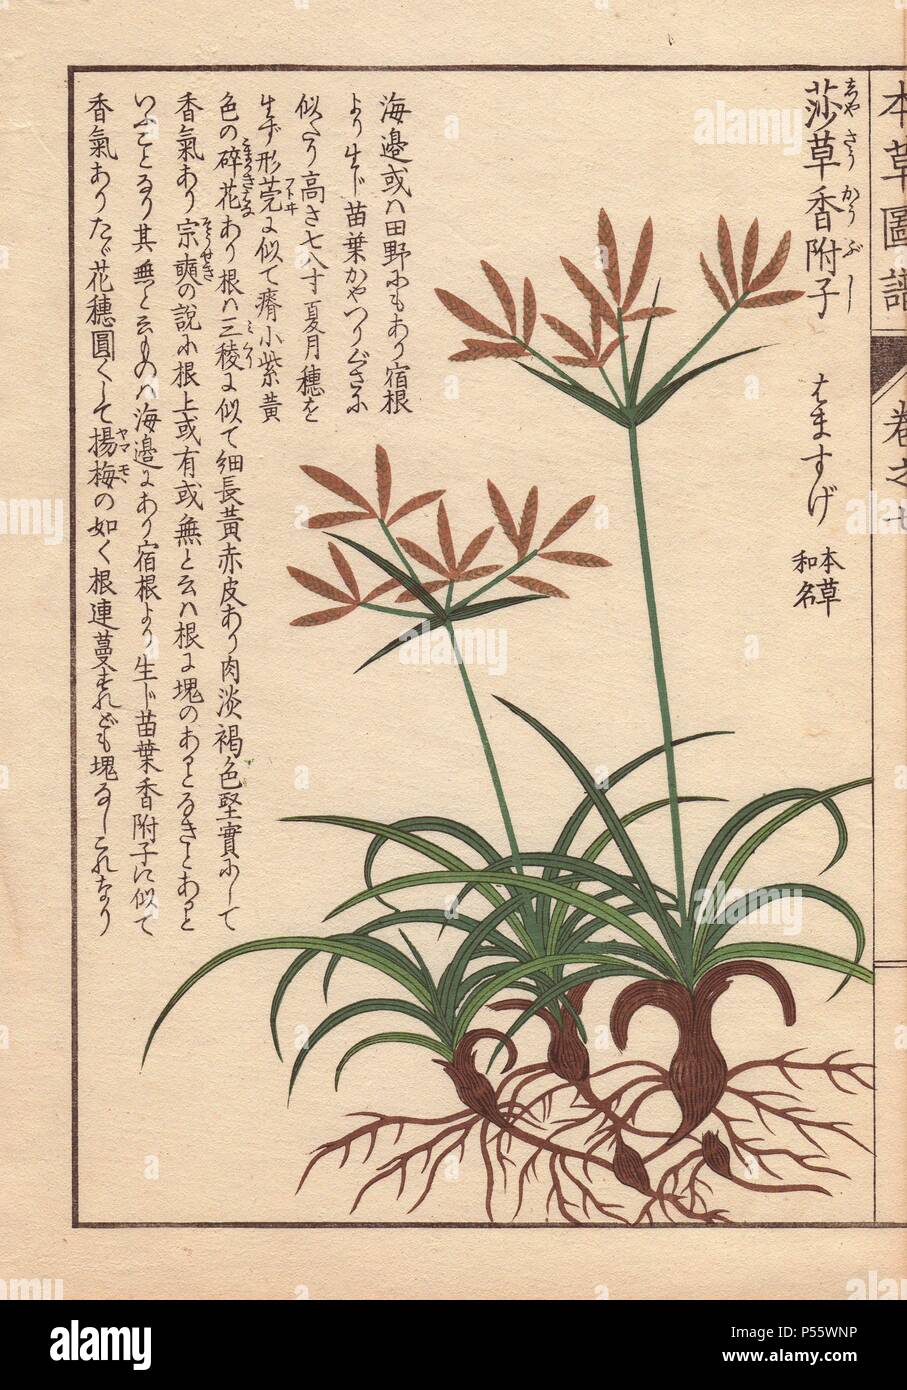 Roots, leaves and flowers of coco-grass, purple nut sedge, red nut sedge, Cyperus rotundus L. Hamasuge. Colour-printed woodblock engraving by Kan'en Iwasaki from 'Honzo Zufu,' an Illustrated Guide to Medicinal Plants, 1884. Iwasaki (1786-1842) was a Japanese botanist, entomologist and zoologist. He was one of the first Japanese botanists to incorporate western knowledge into his studies. Stock Photo